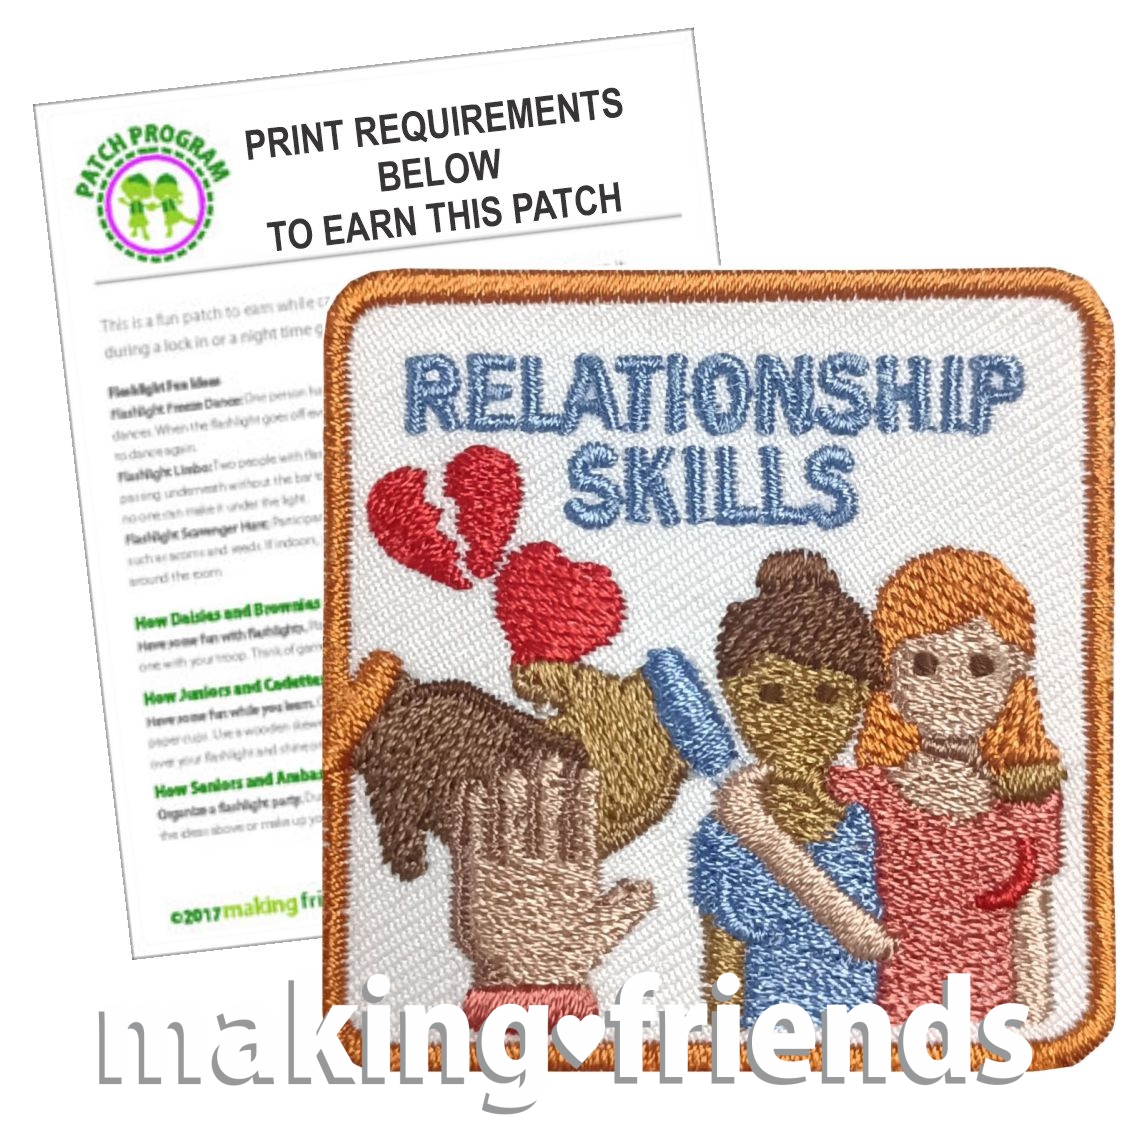 Girl Scout Adulting Patch Program® Relationship Skills